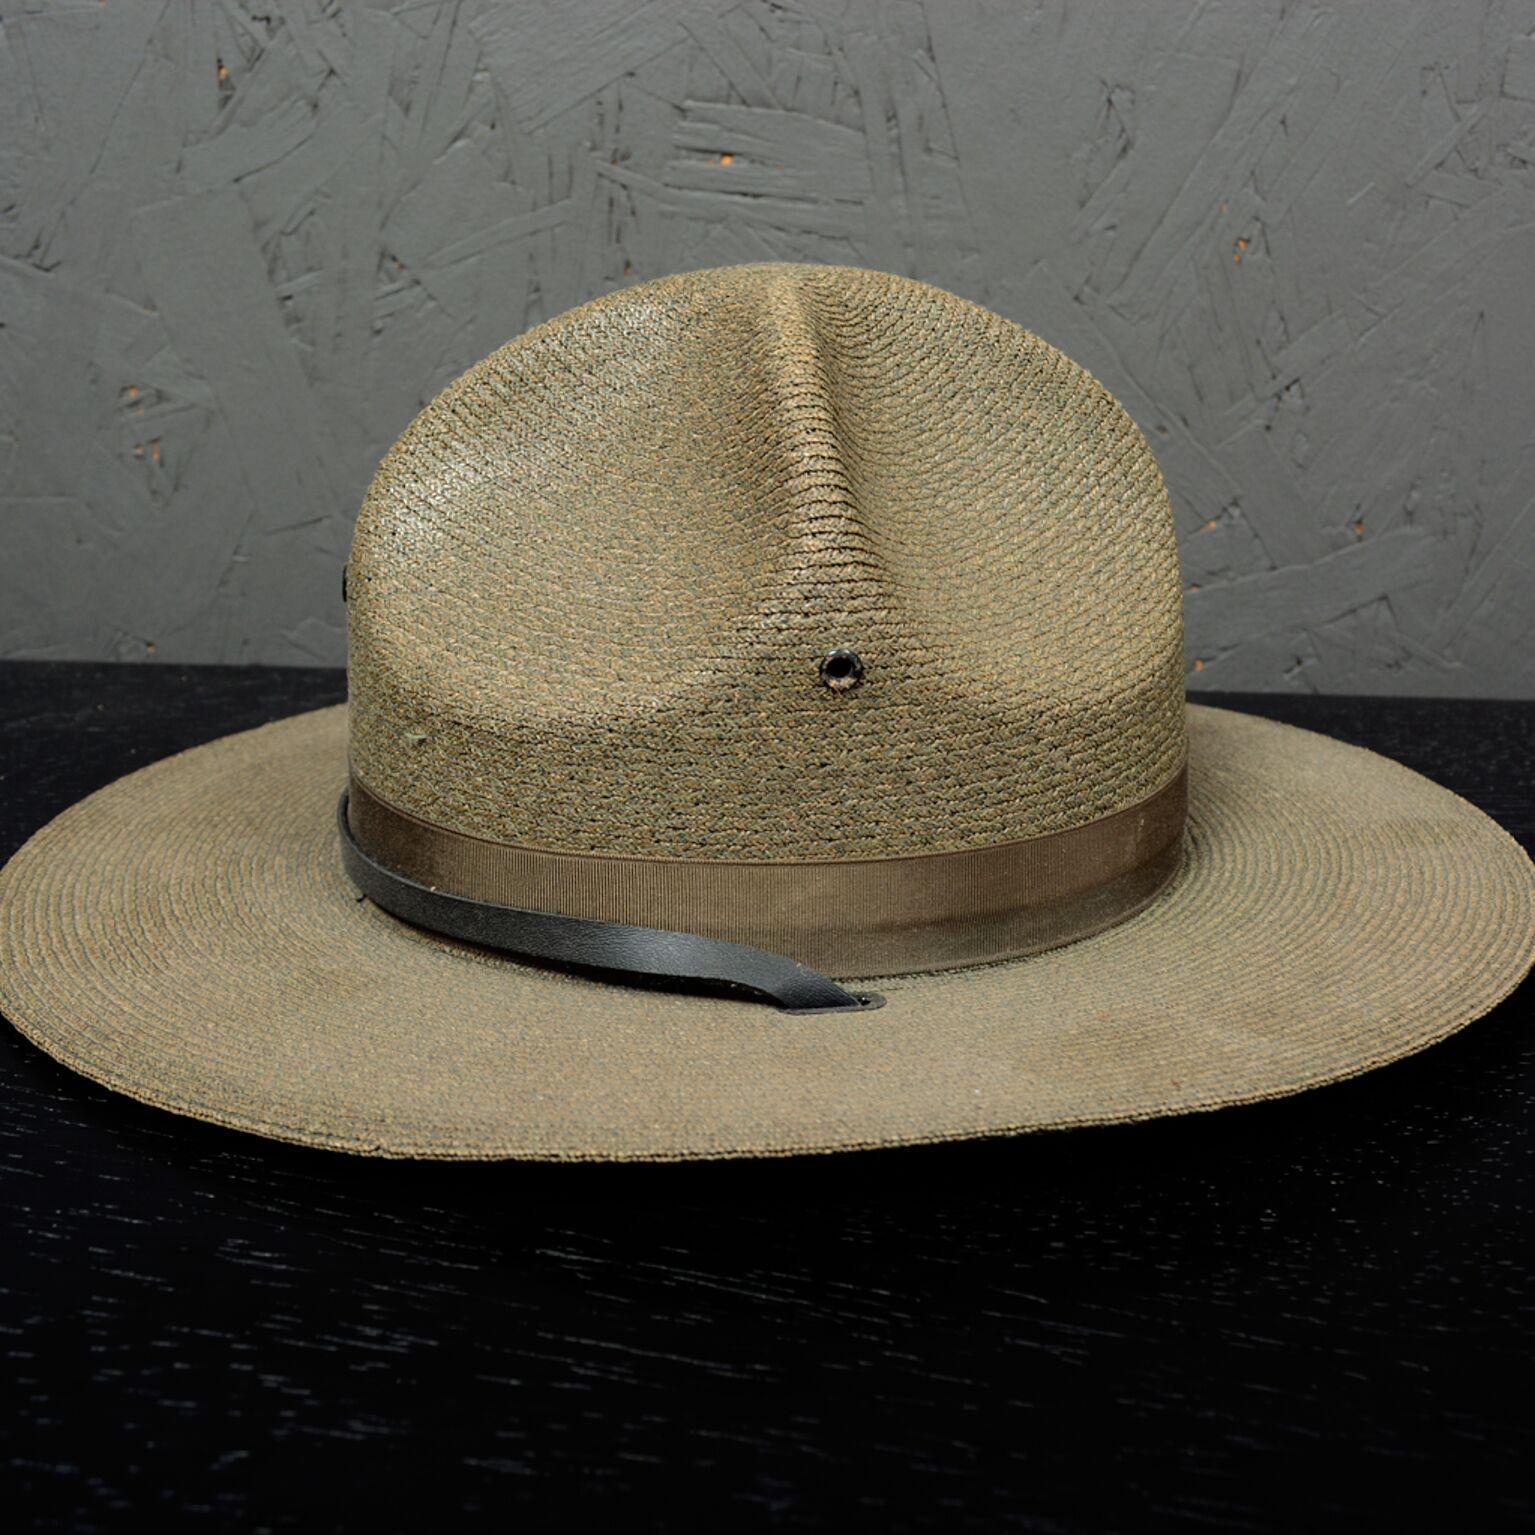 American Classical Genuine Vintage Law Man Hat Milan Campaign Sheriff Ranger Police Officer